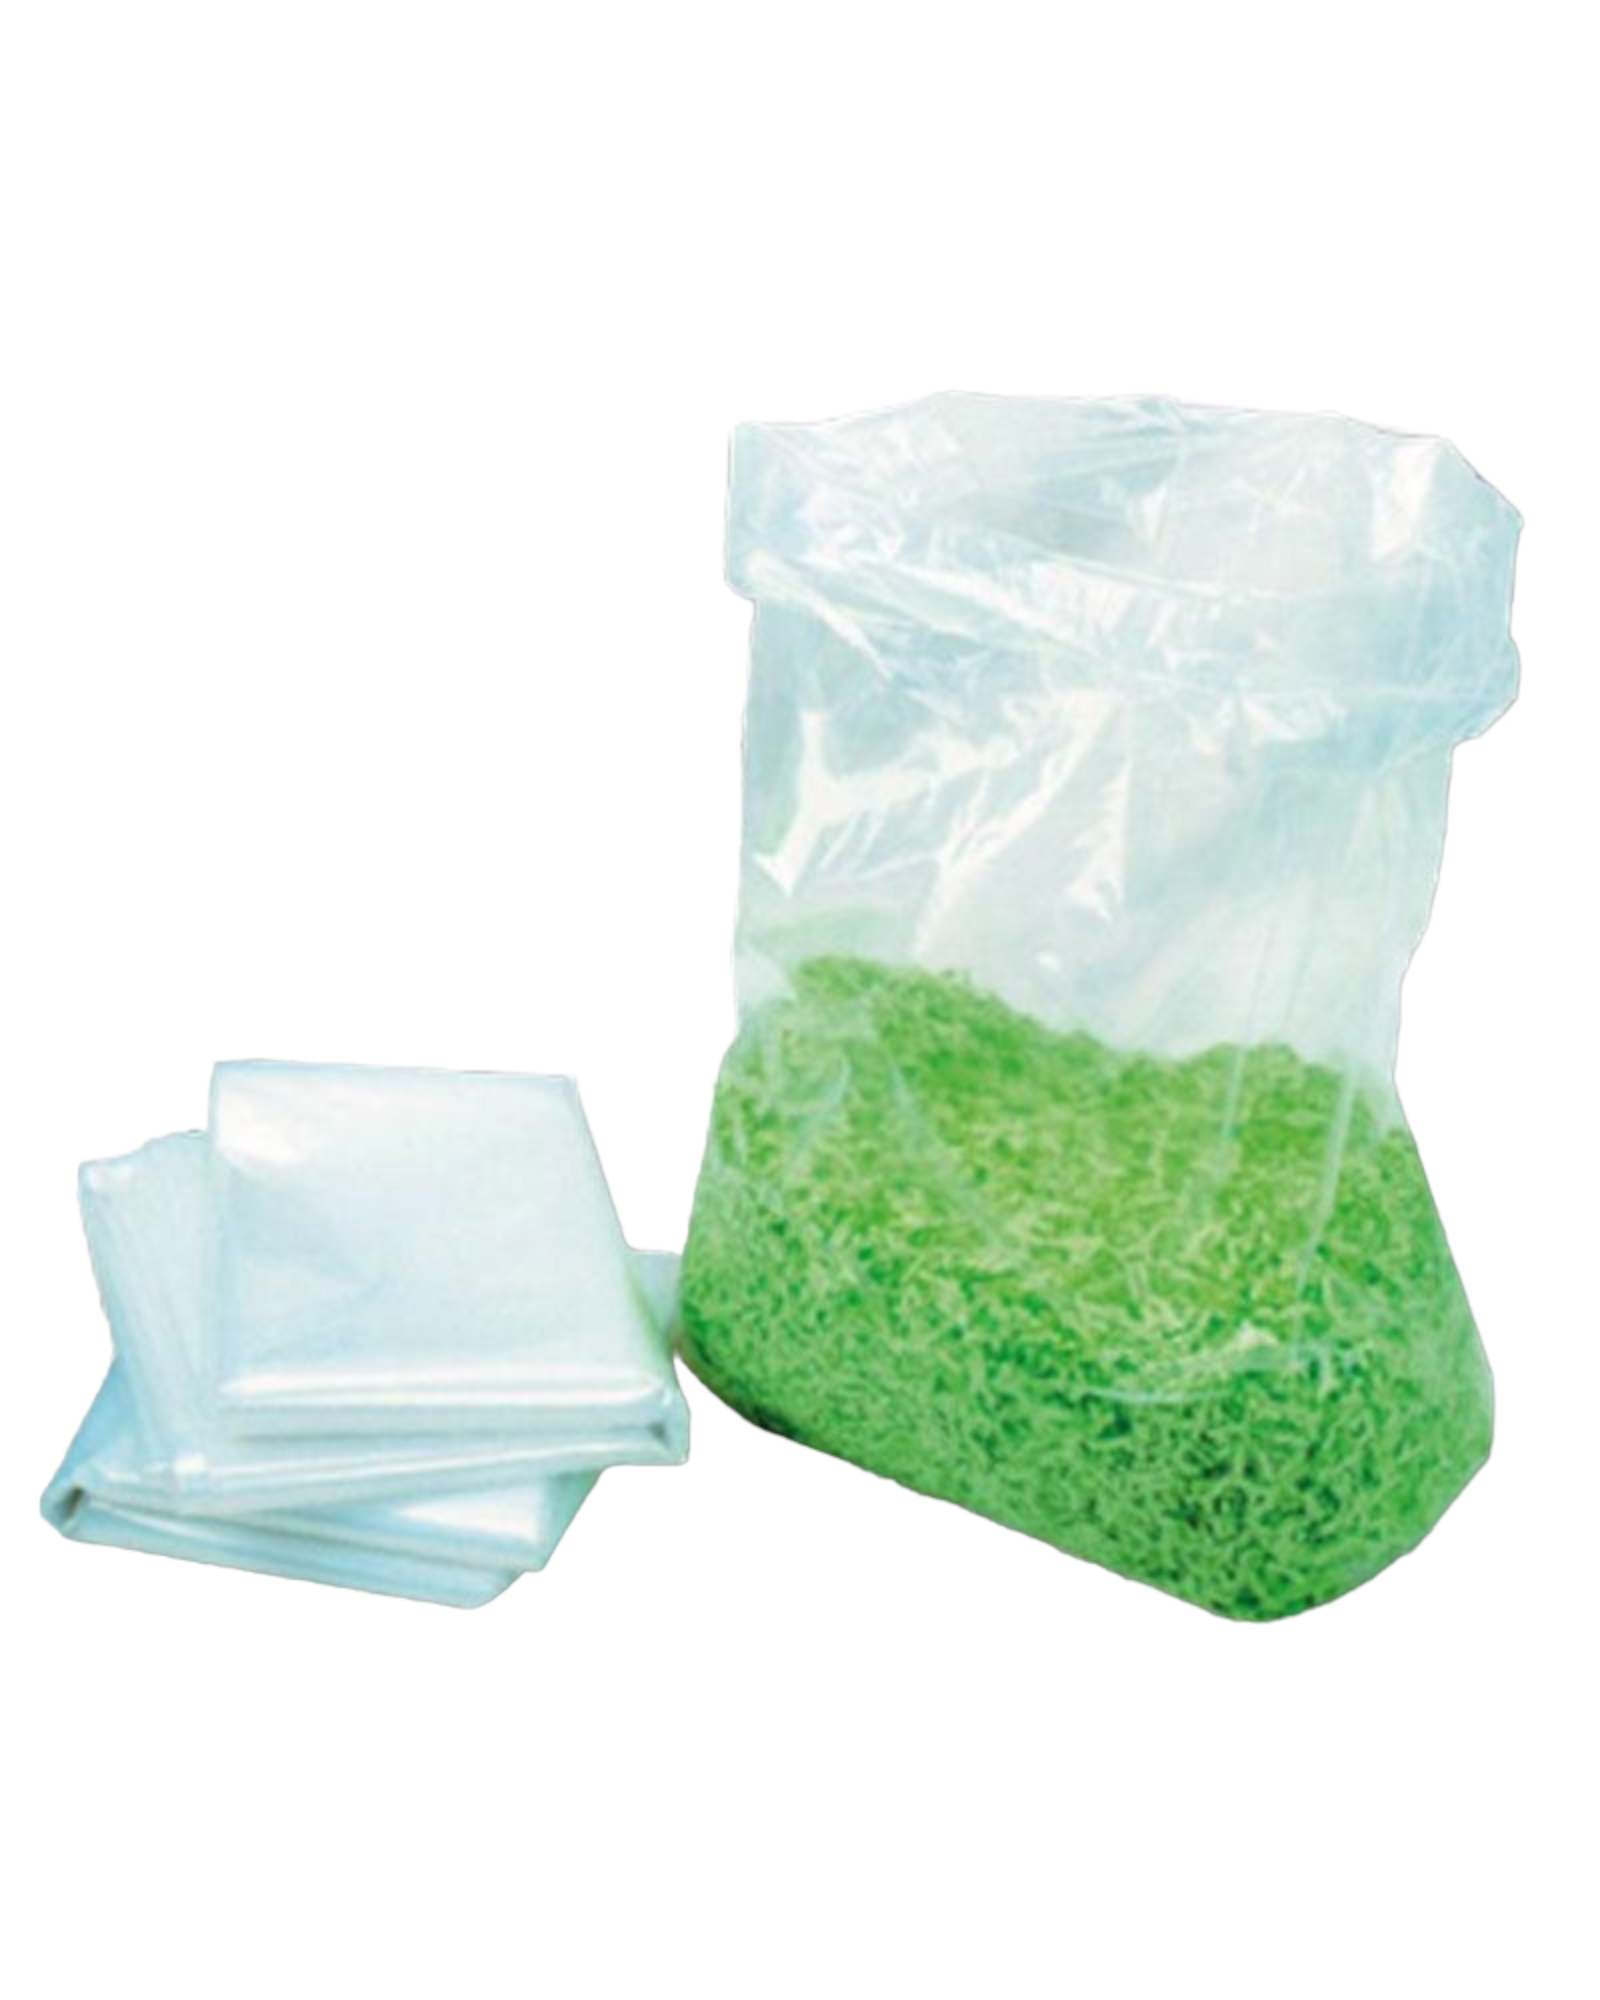 Plastic Bag 360x600mmx75mic 10kg Clear - 100pack (Ice Cubes)